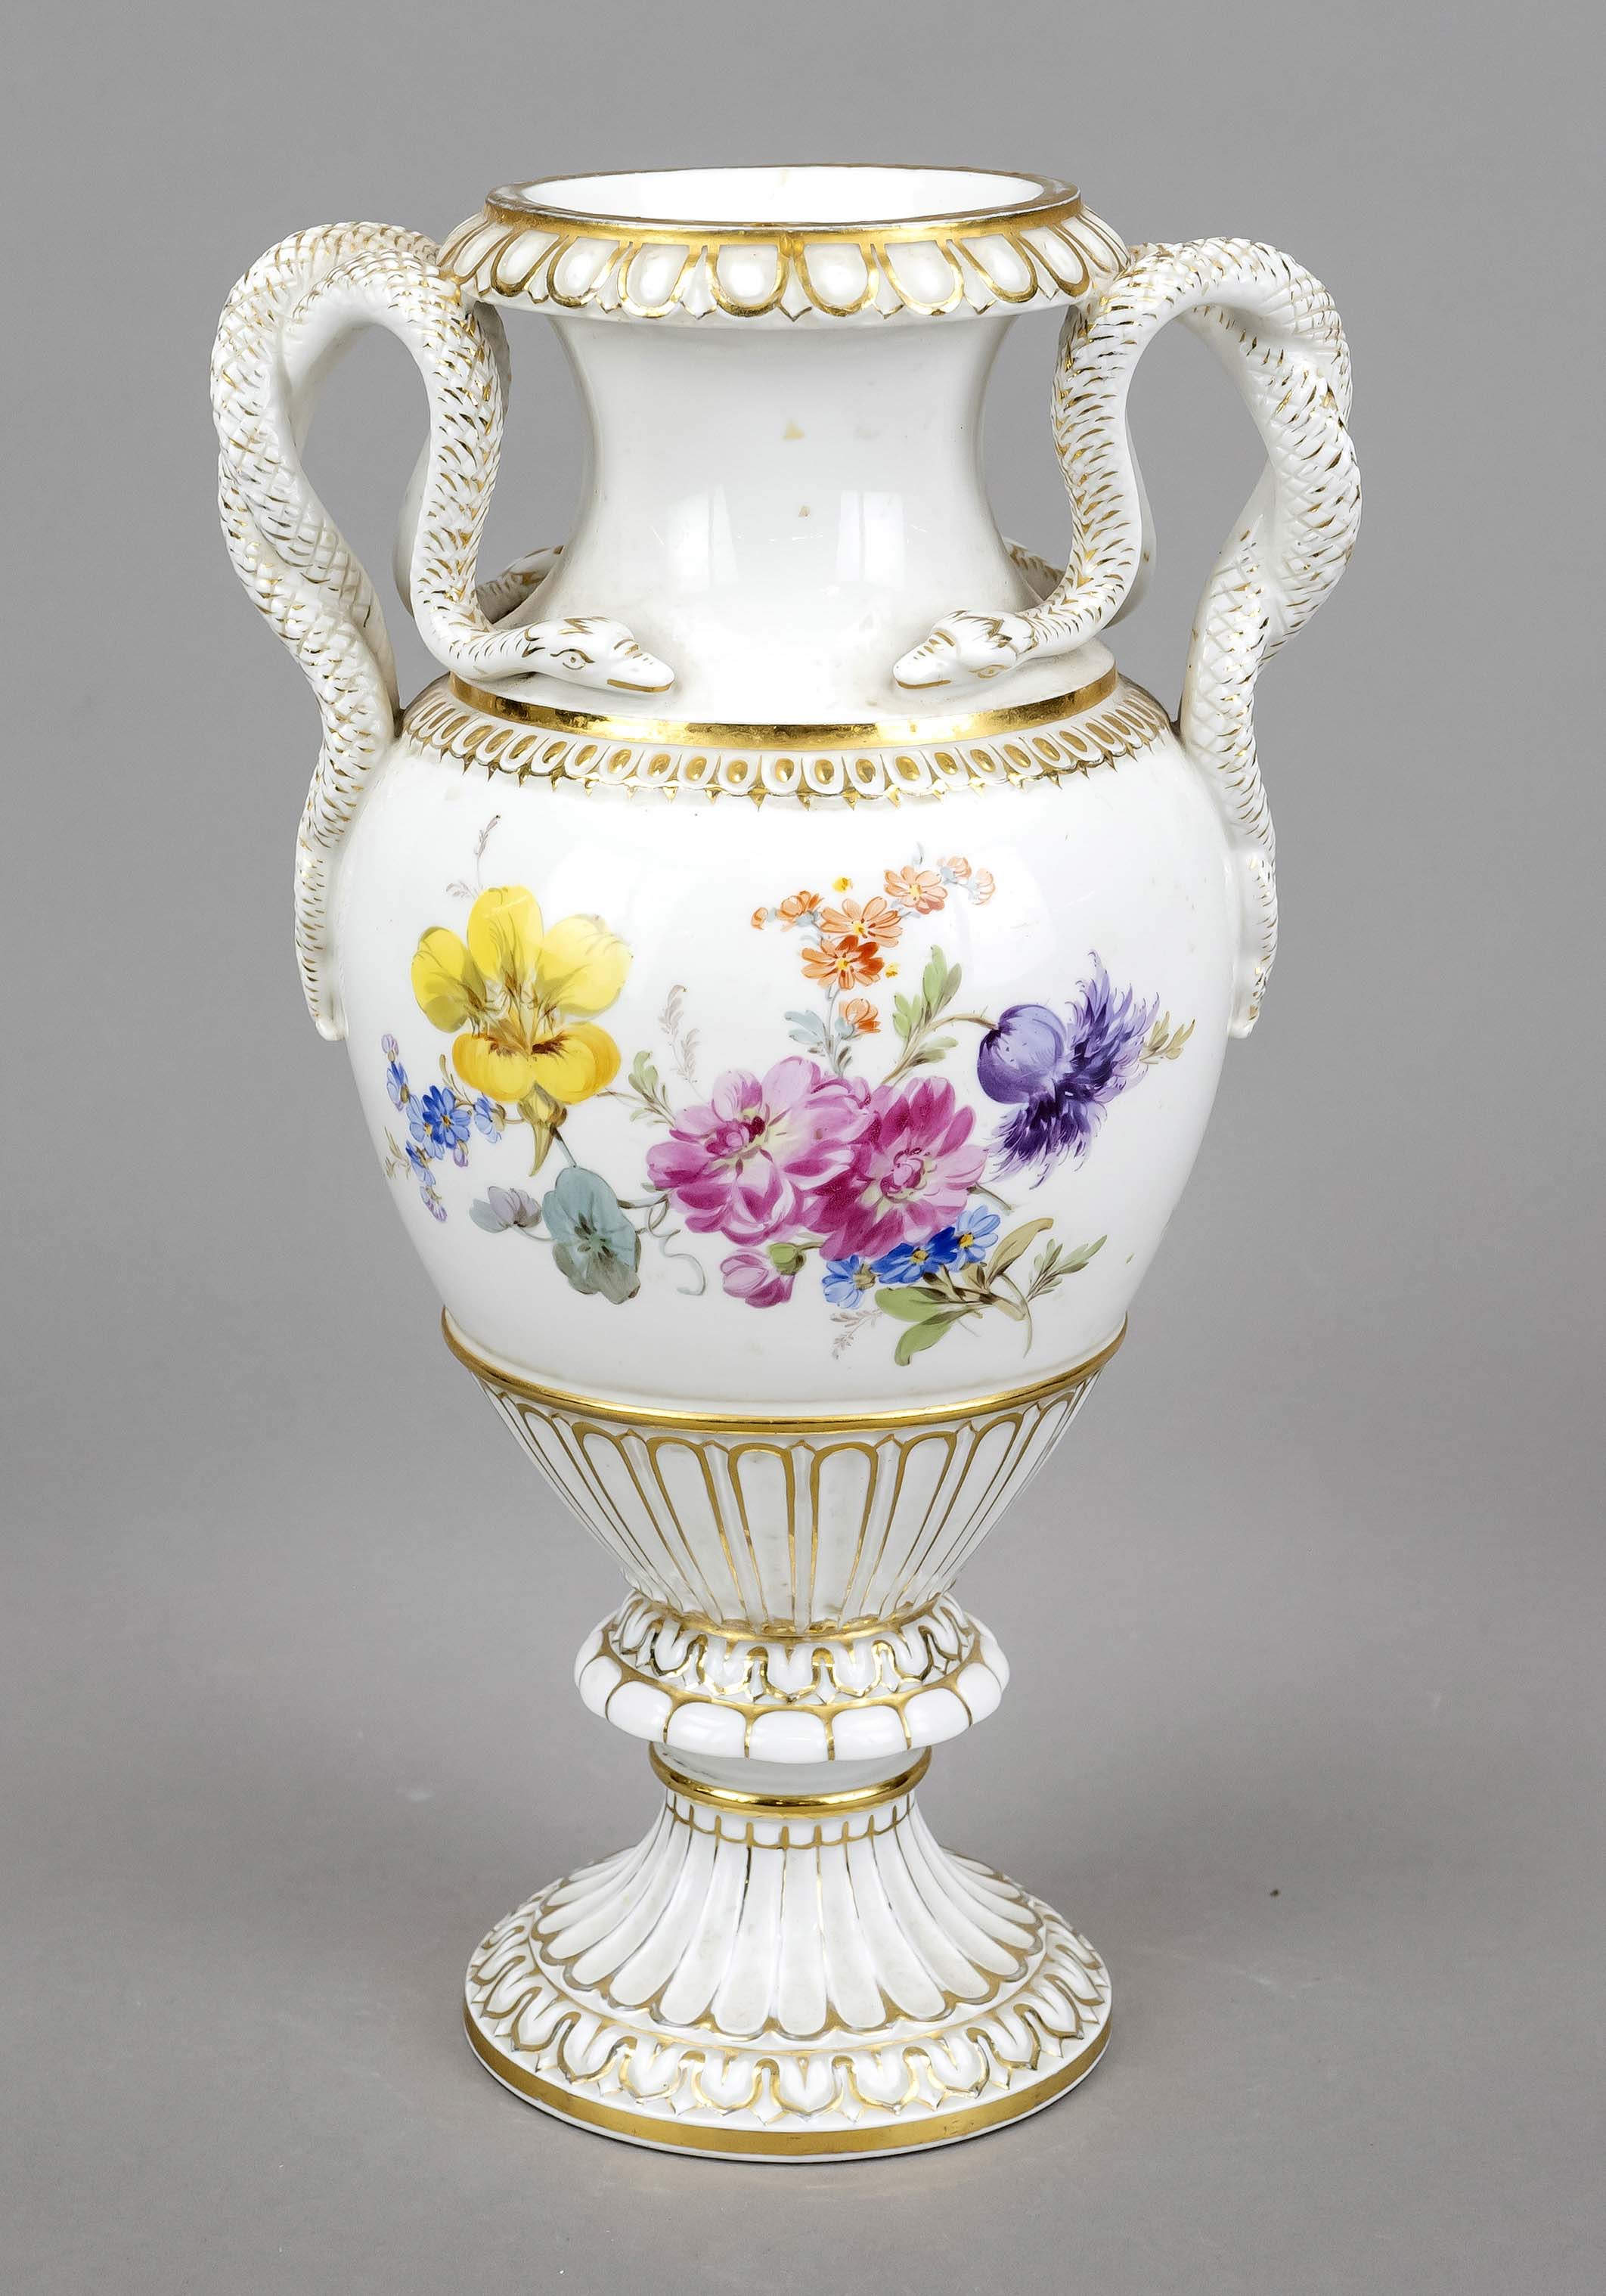 Snake-handled vase, Meissen, mark 1850-1924, 1st choice, amphora form with side handles in the shape - Image 2 of 2